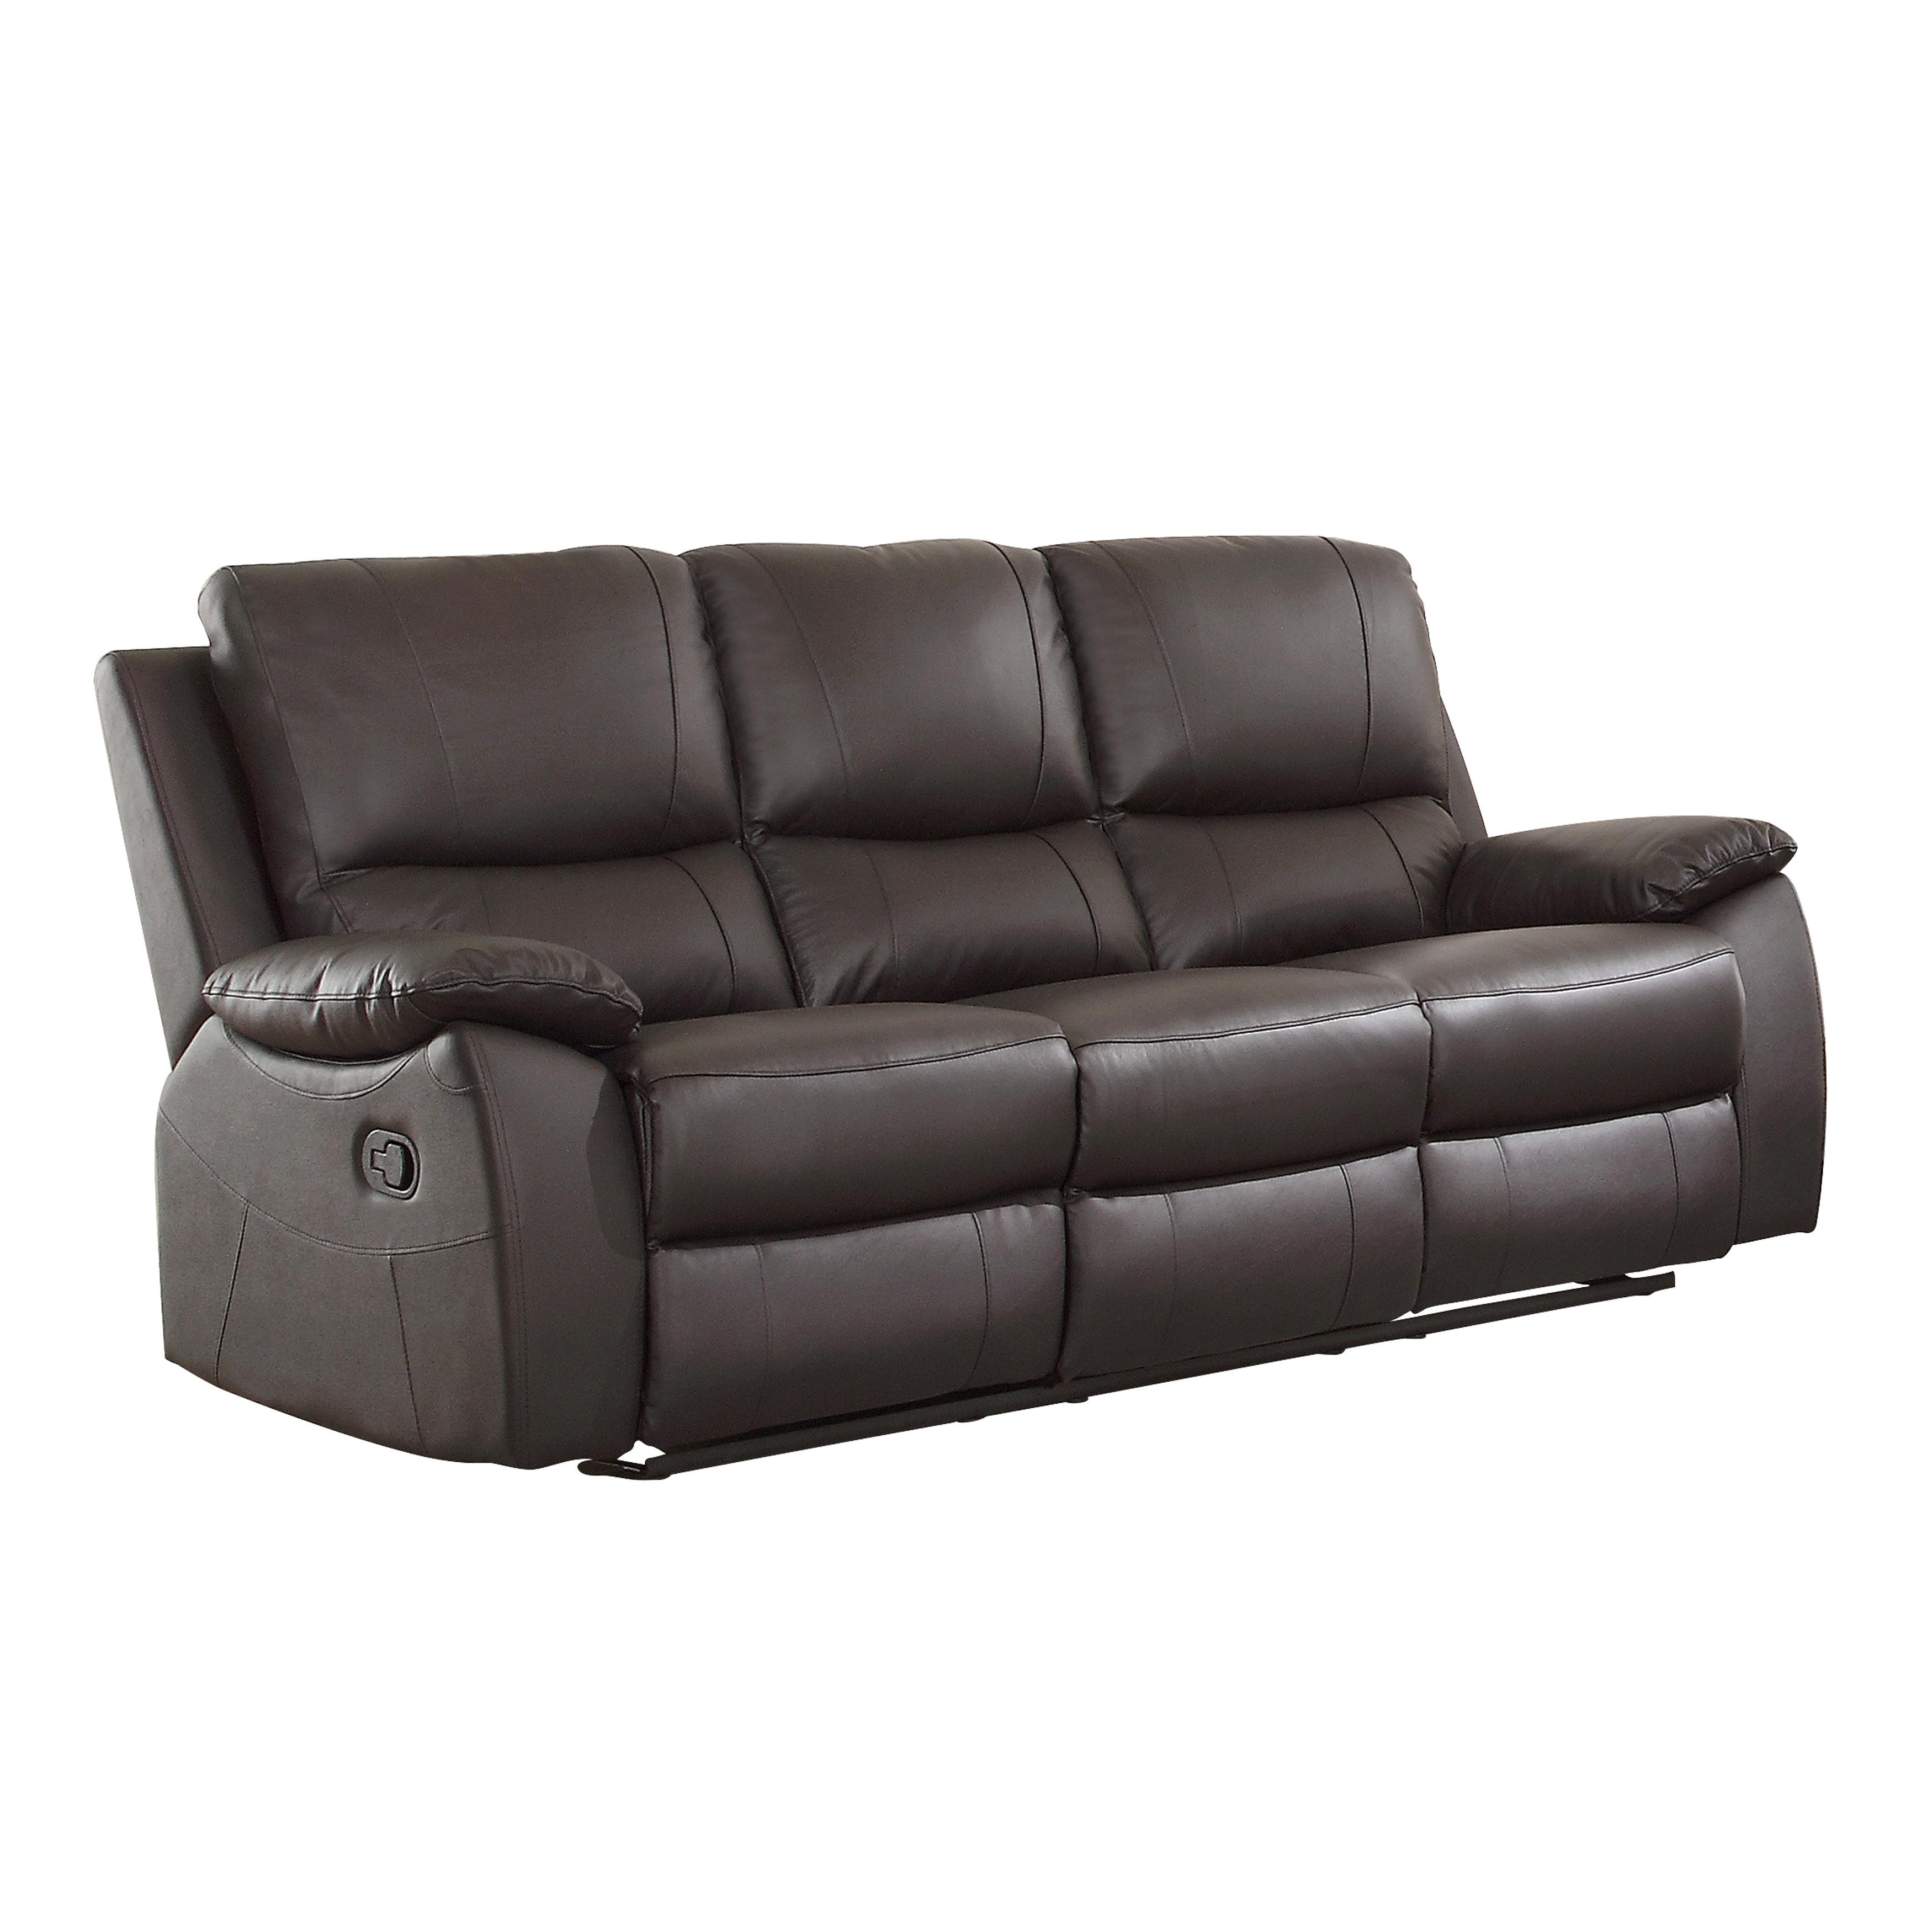 Contemporary Reclining Sofa Dawson Reclining Sofa 9368BRW-3-S 9368BRW-3-S in Brown Faux Leather